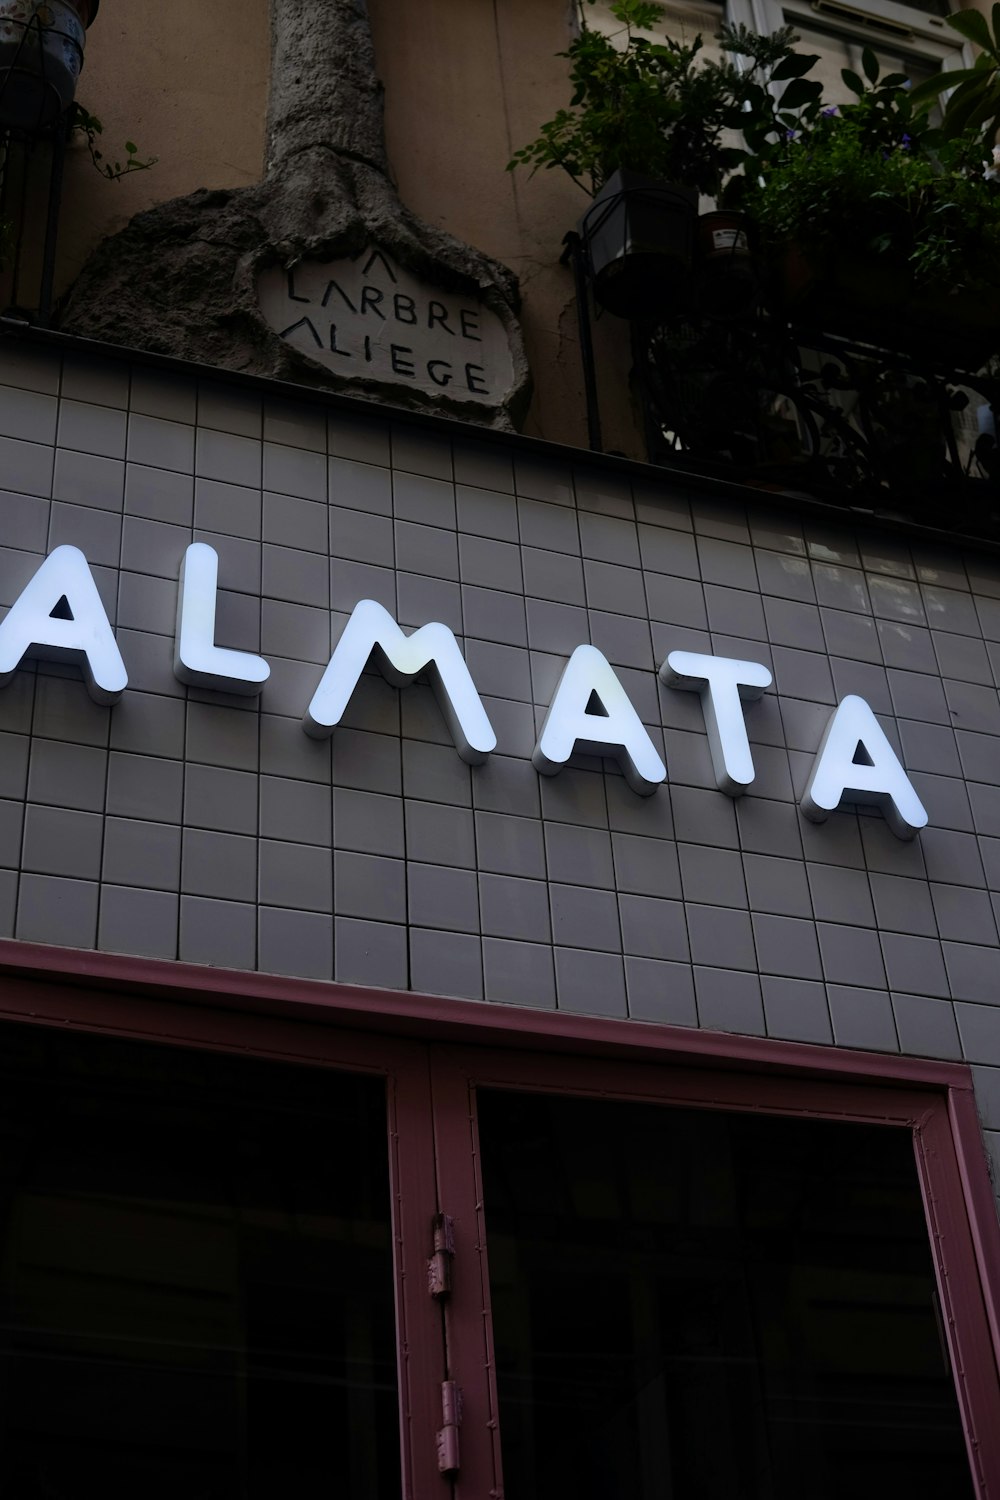 a sign on the side of a building that says almaata